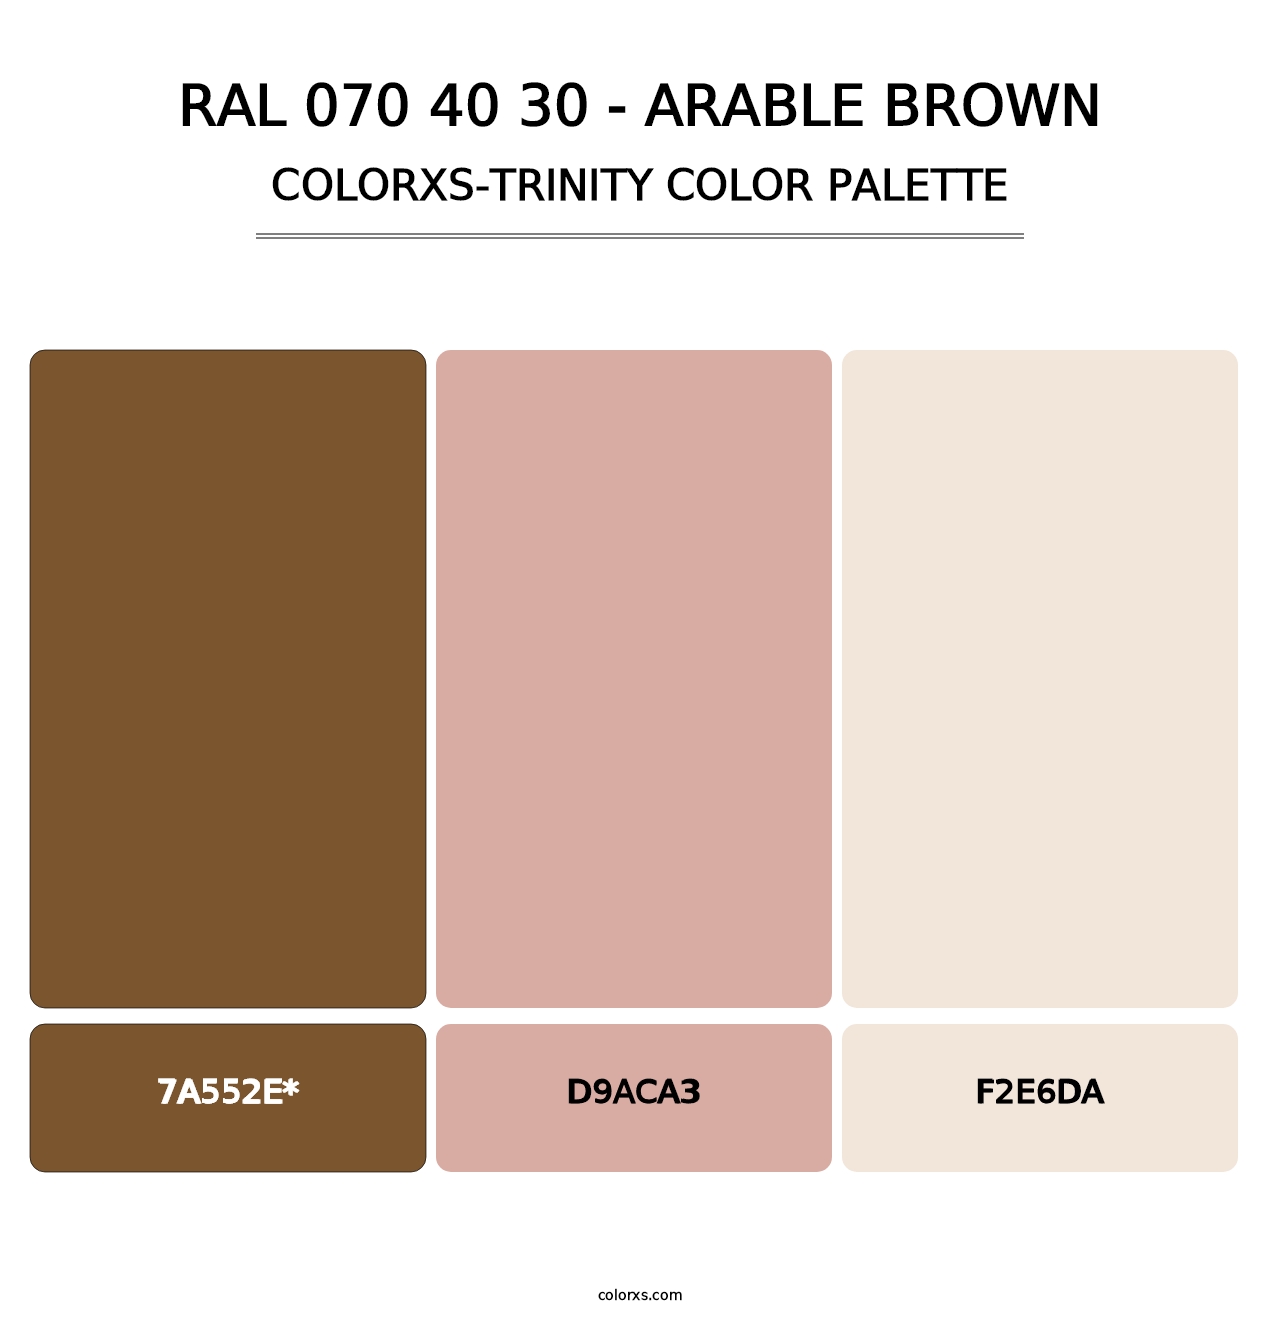 RAL 070 40 30 - Arable Brown - Colorxs Trinity Palette